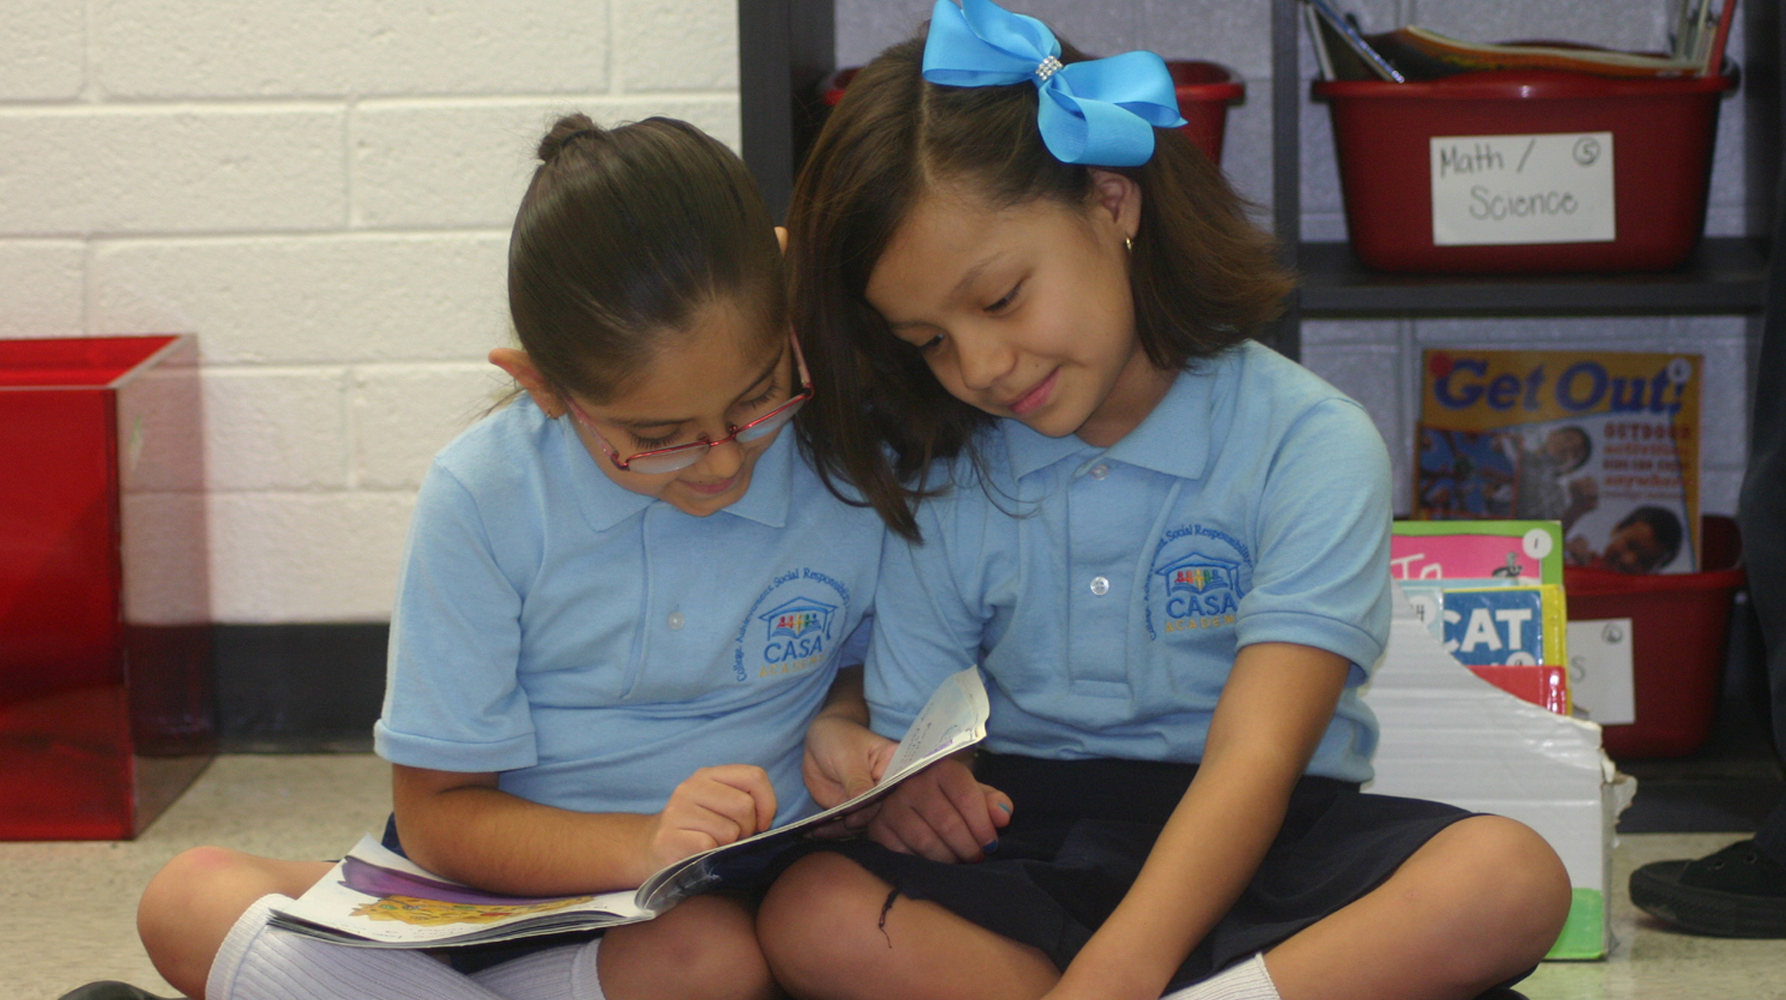 Two young scholars at CASA Academy charter school read together on the carpet